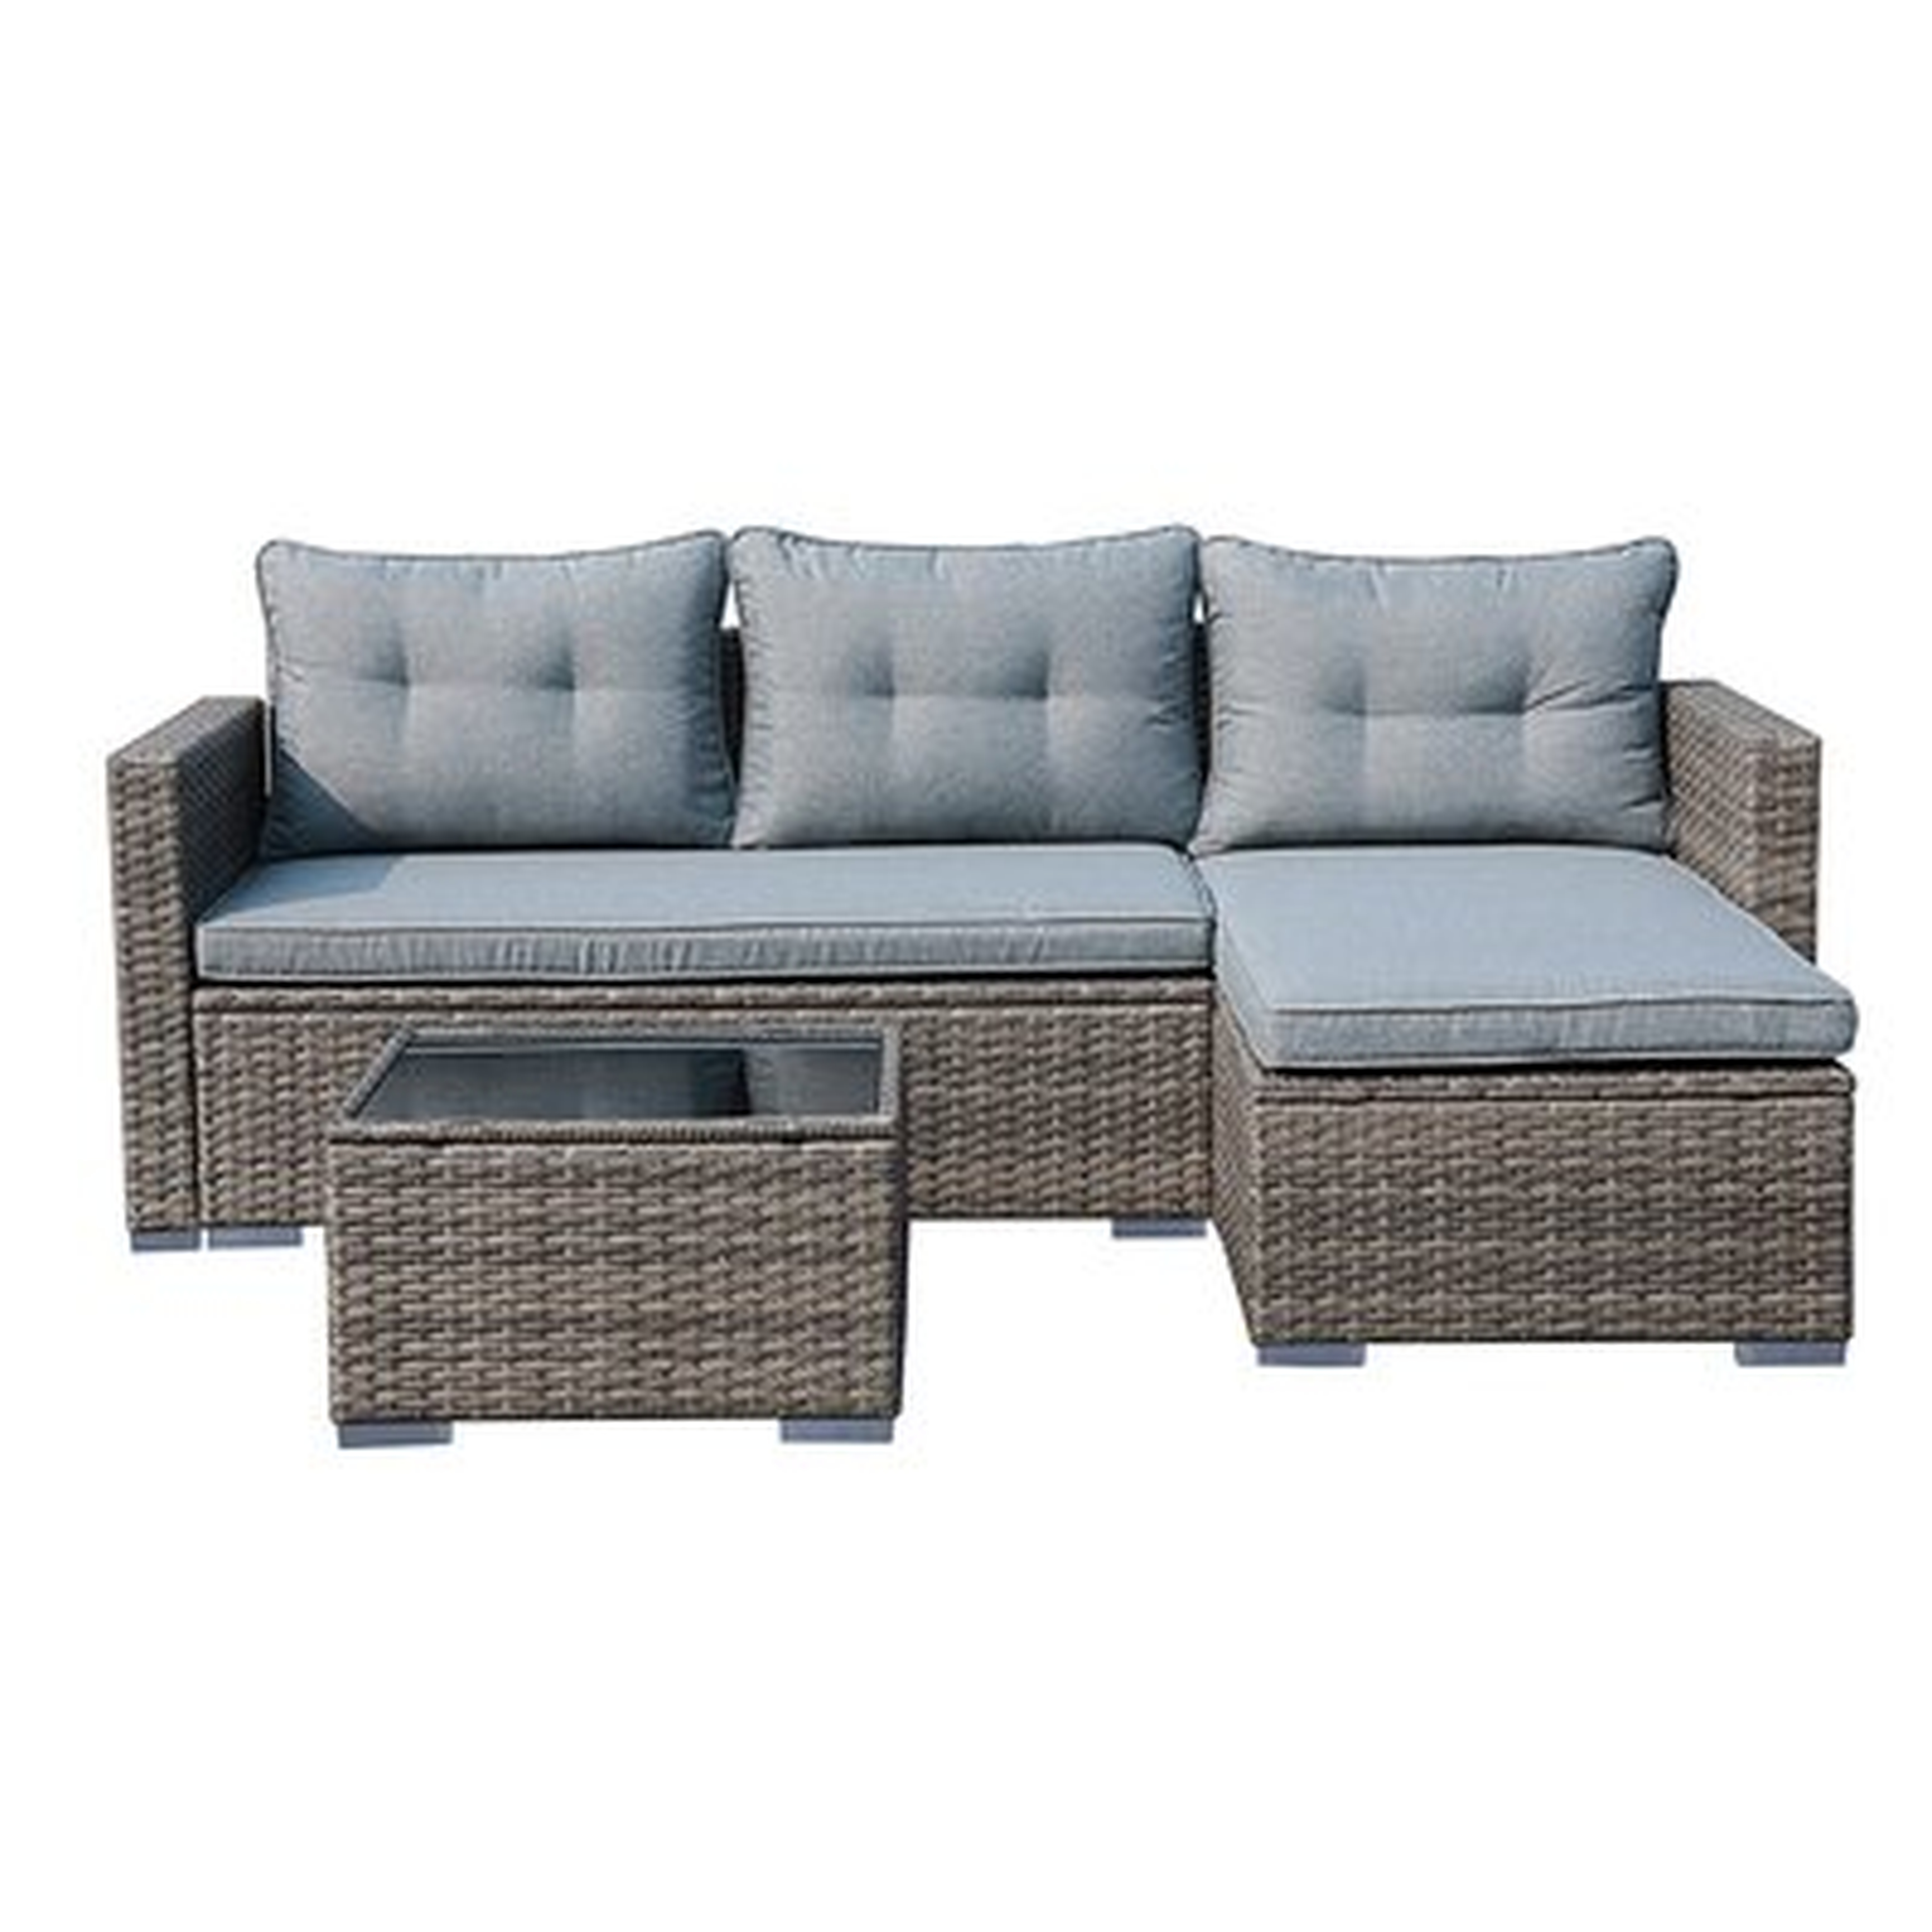 Cromford 3 Piece Rattan Sectional Seating Group with Cushions - Wayfair